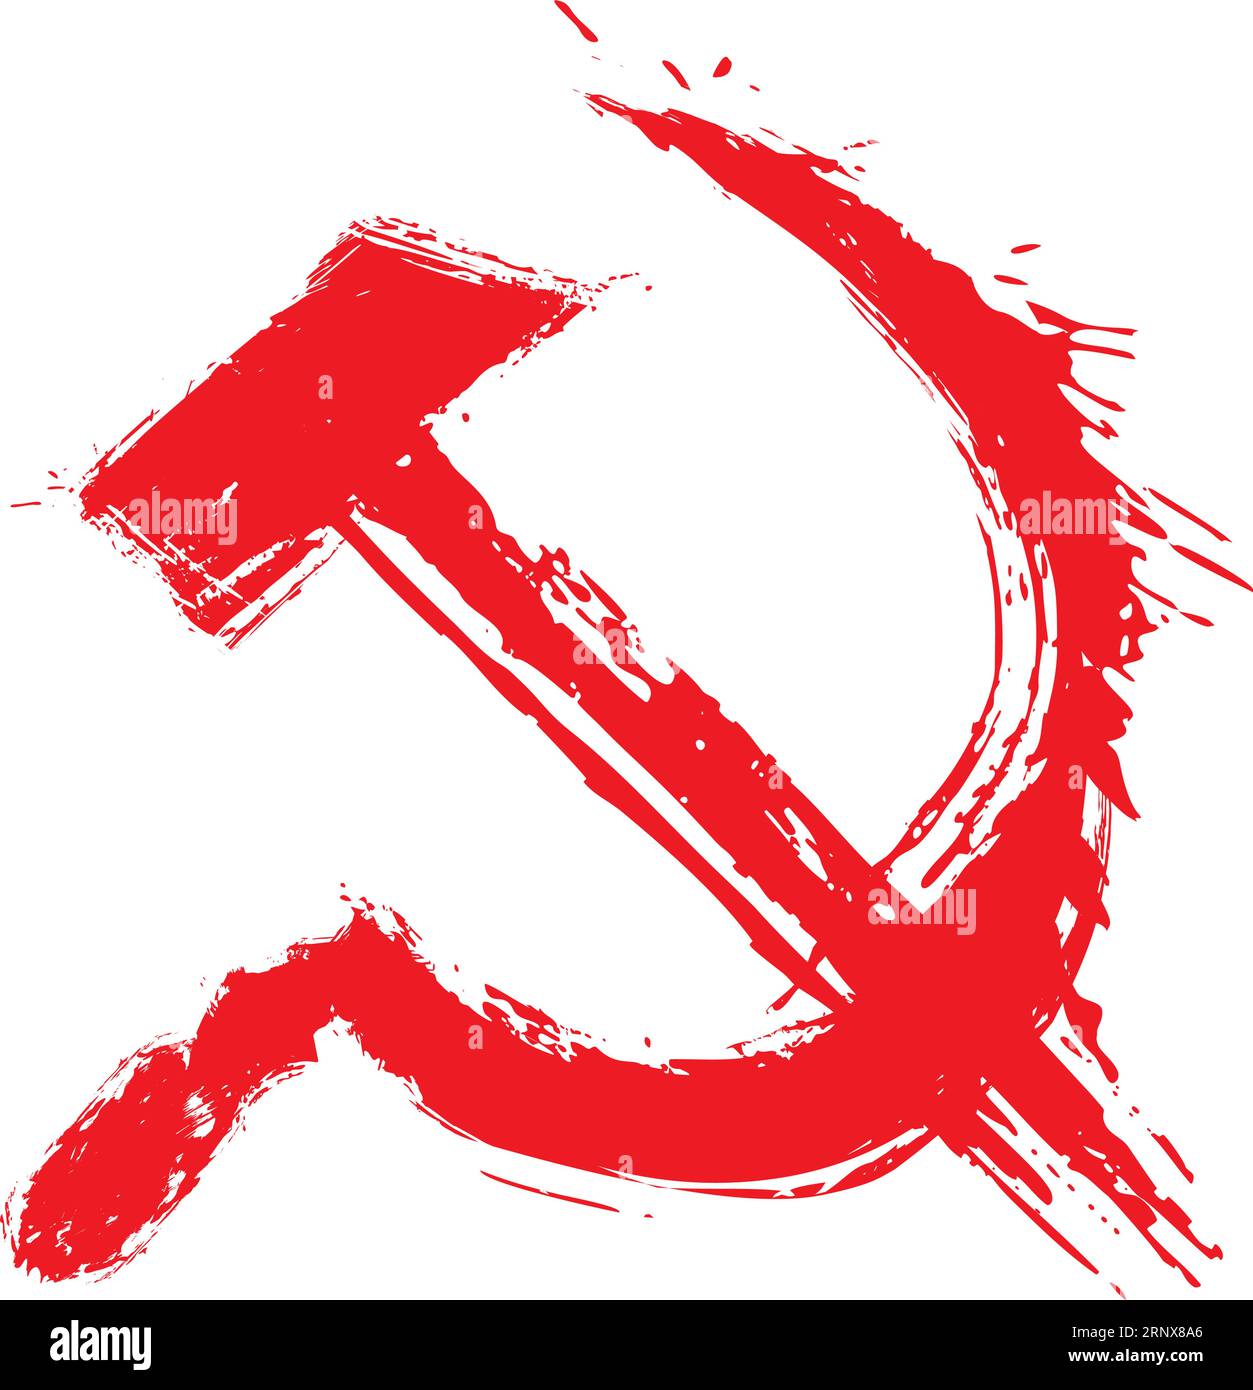 Illustration of communism symbol created in grunge style Stock Vector